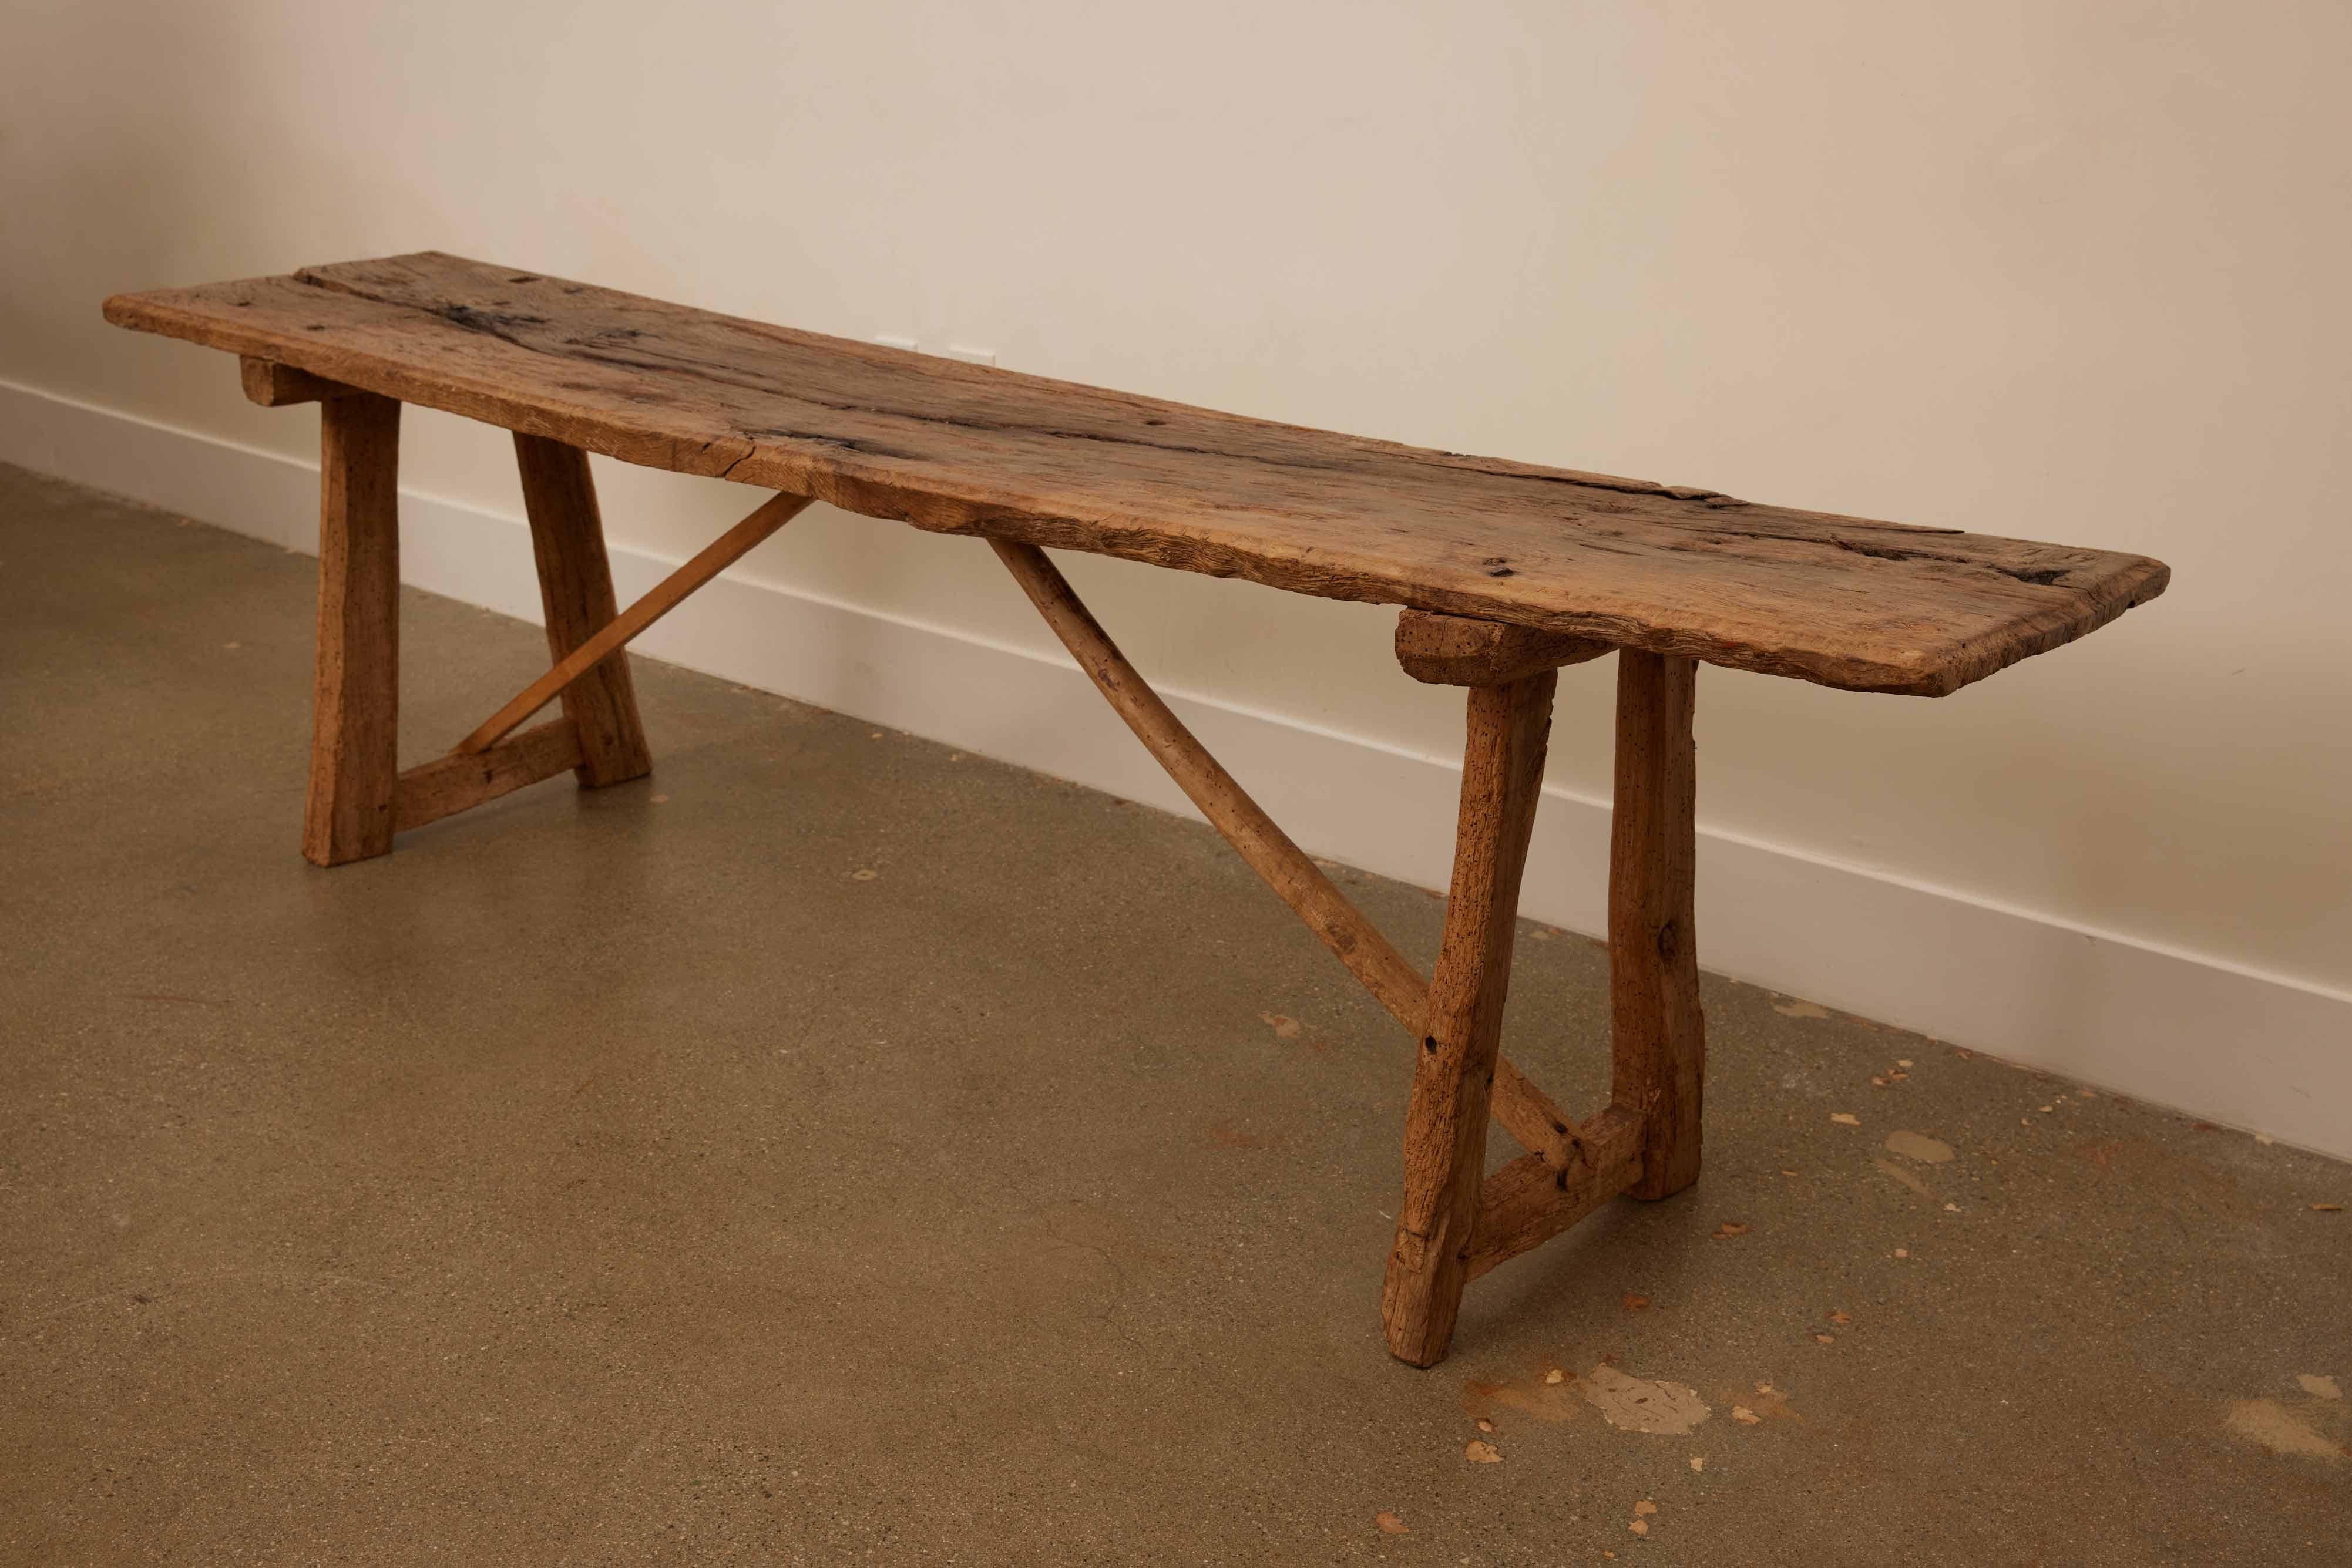 
This Rustic Chestnut & Pine Bench, measuring 79